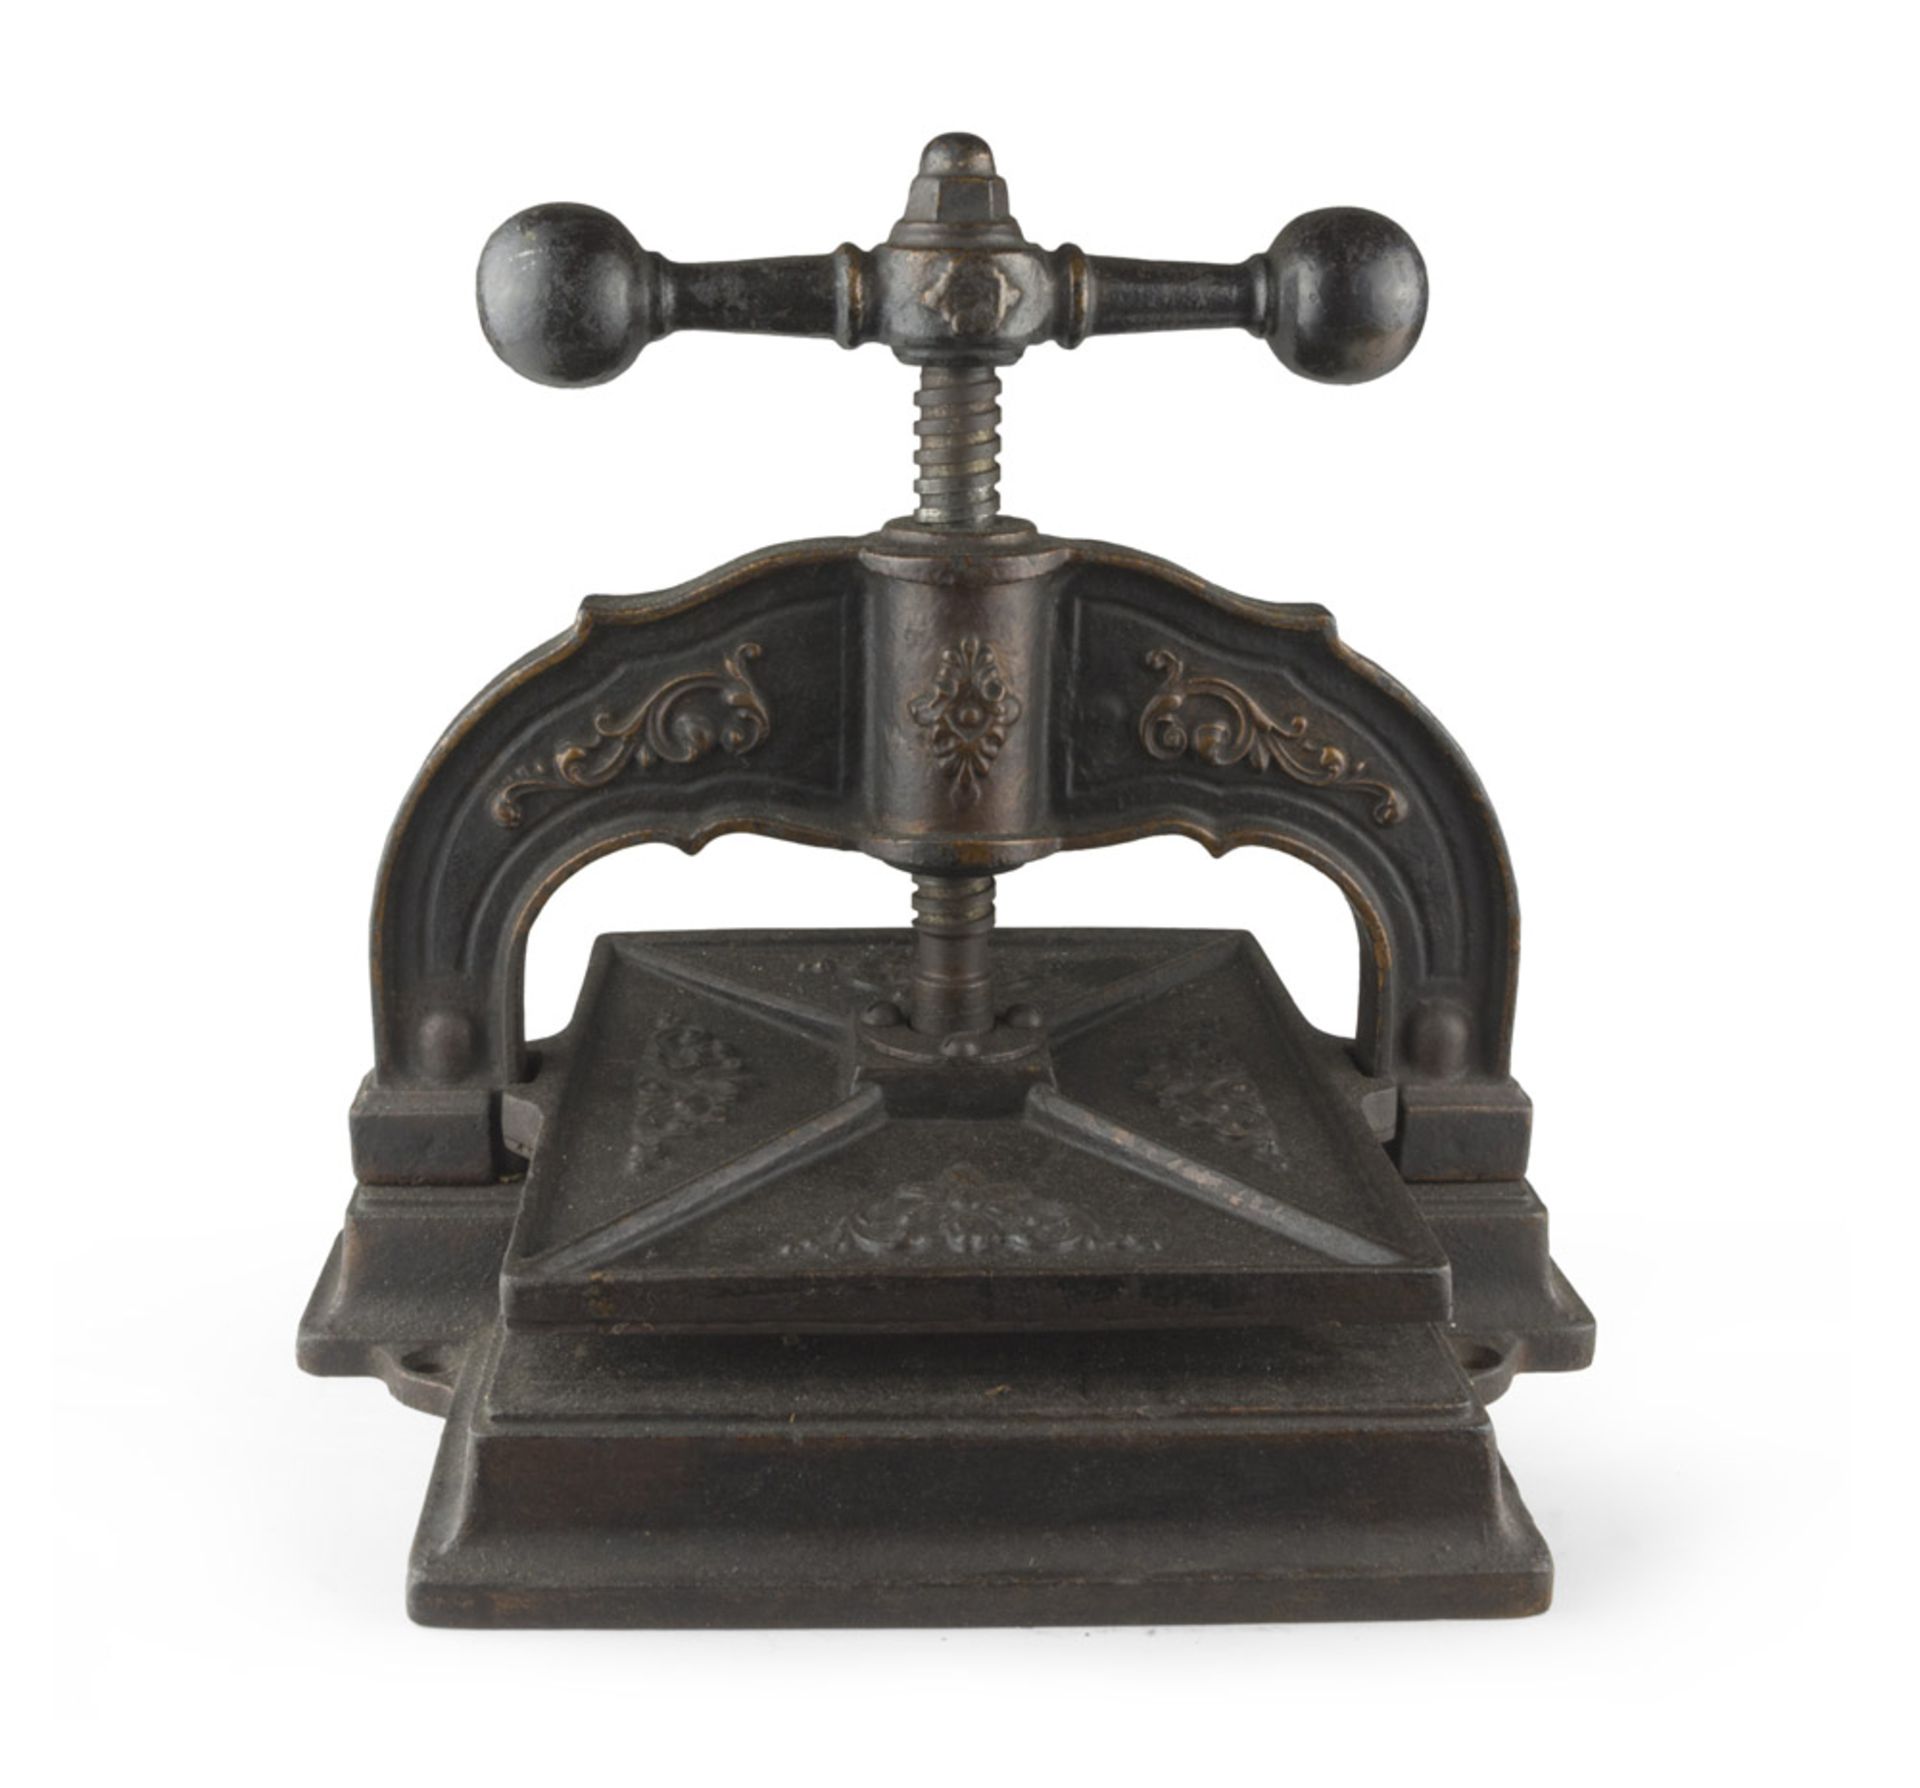 CAST IRON PRINT PRESS, LATE 19TH CENTURY with elements of vegetable decorums. Measures cm. 37 x 34 x